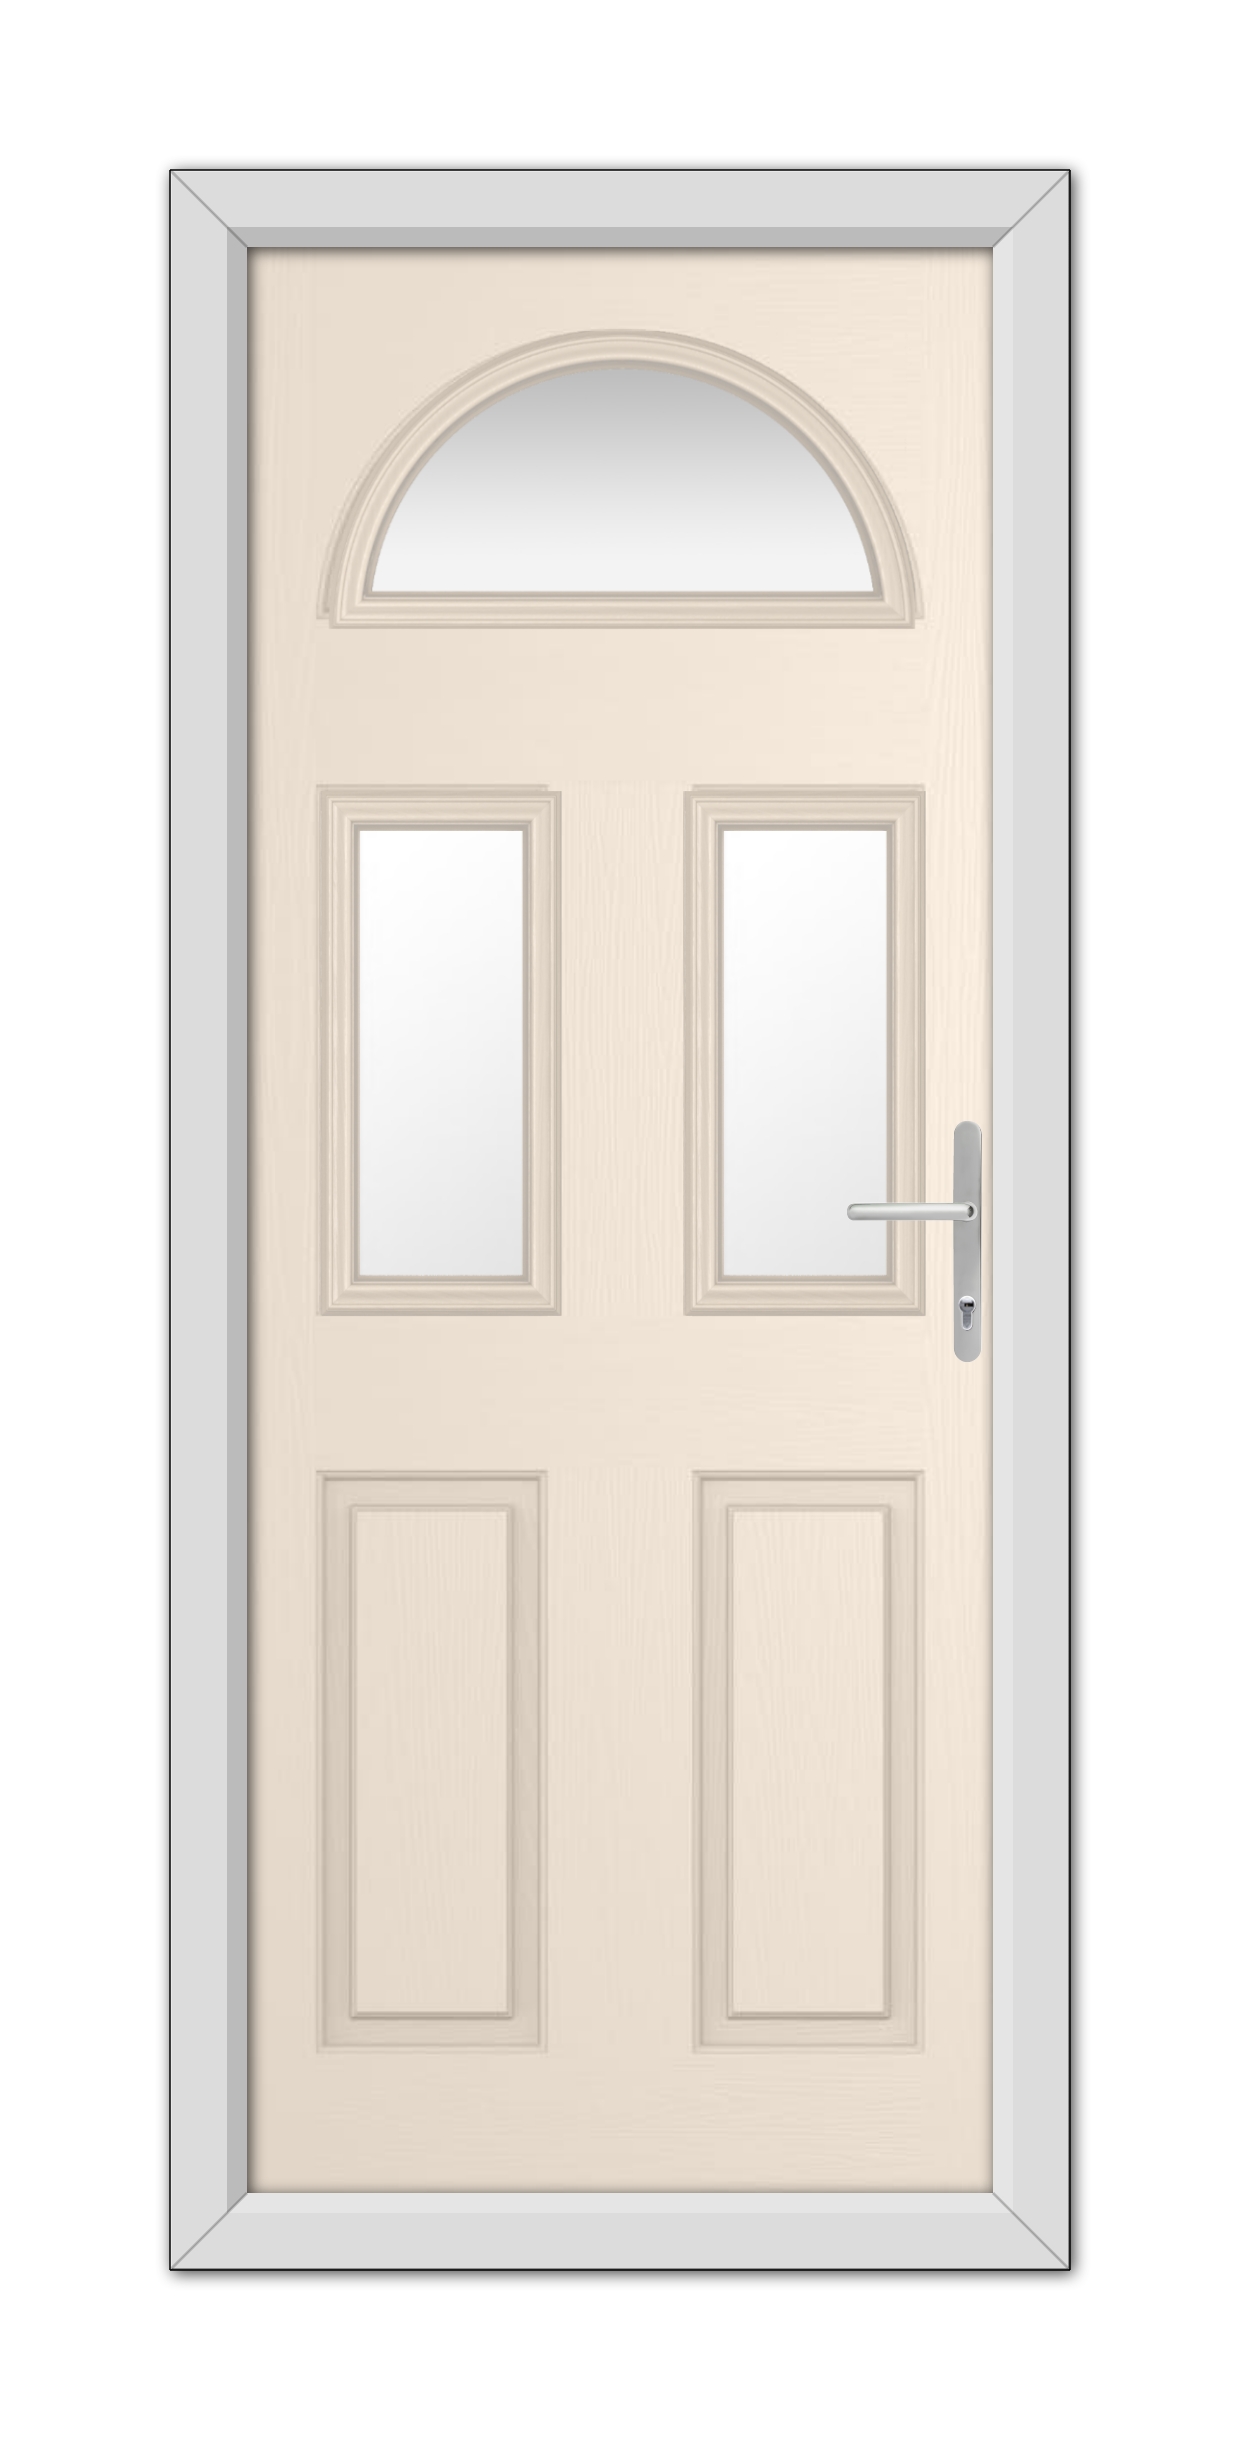 A modern Cream Winslow 3 Composite Door 48mm Timber Core with a semi-circular glass pane at the top, four wooden panels, and a silver handle, framed by a white door frame.